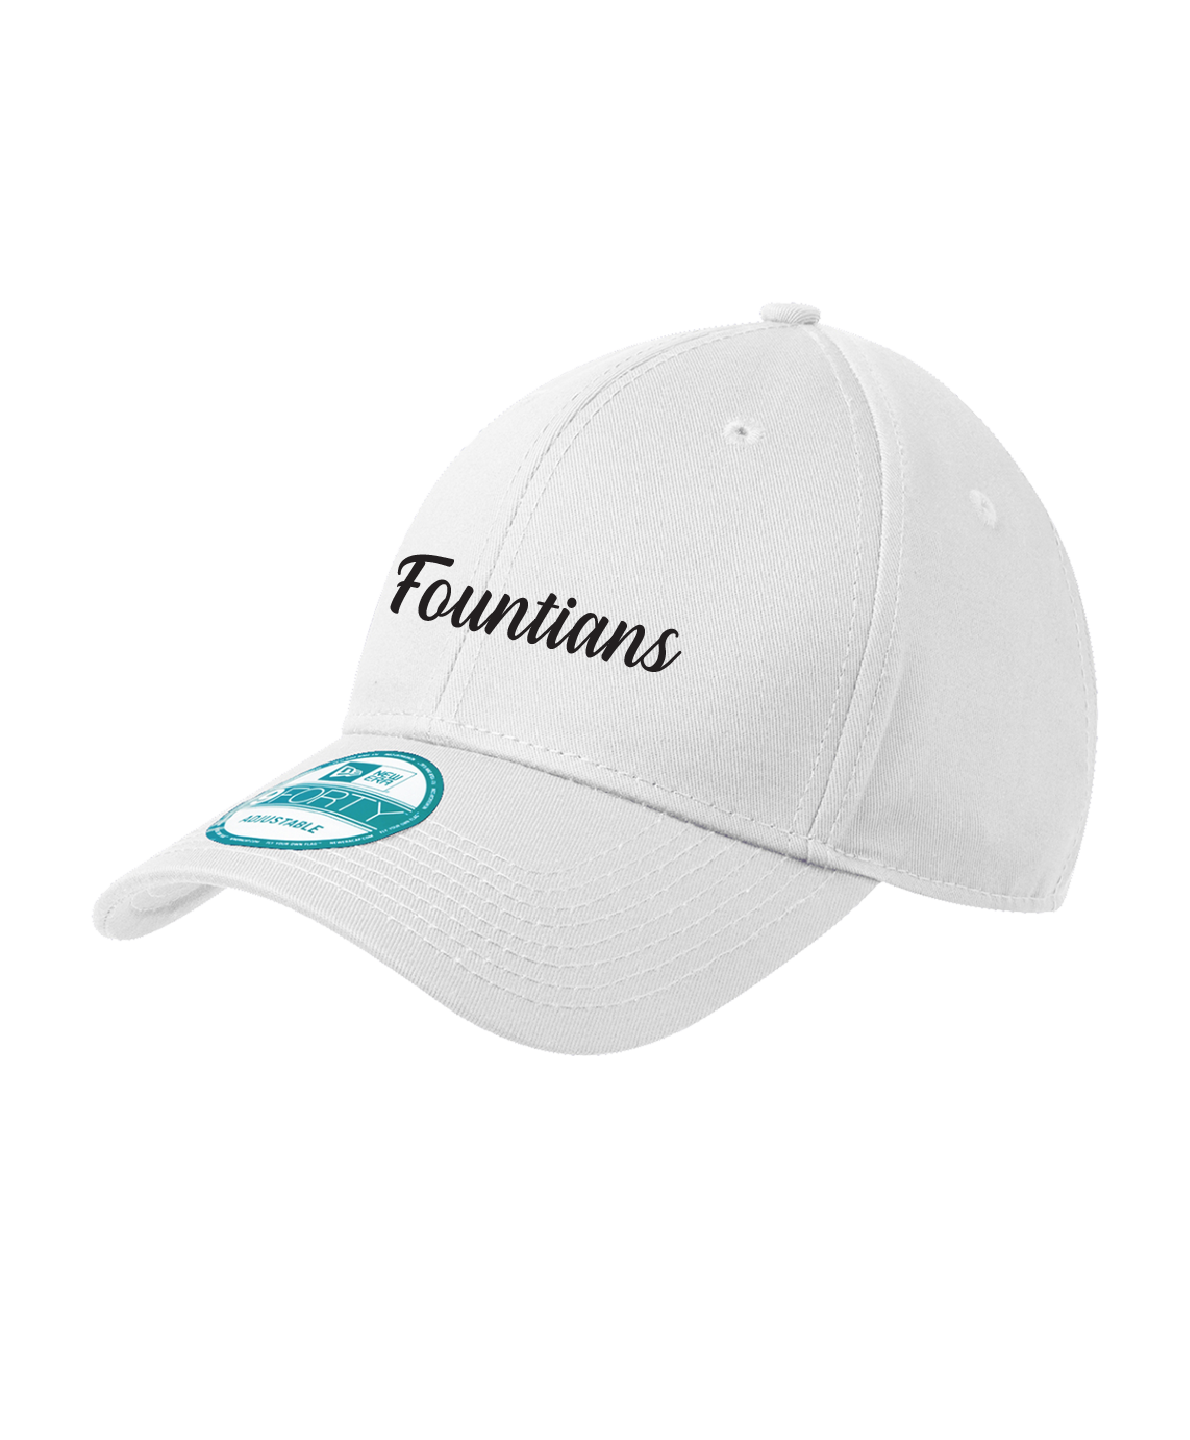 The Fountains  - New Era® - Adjustable Structured Cap